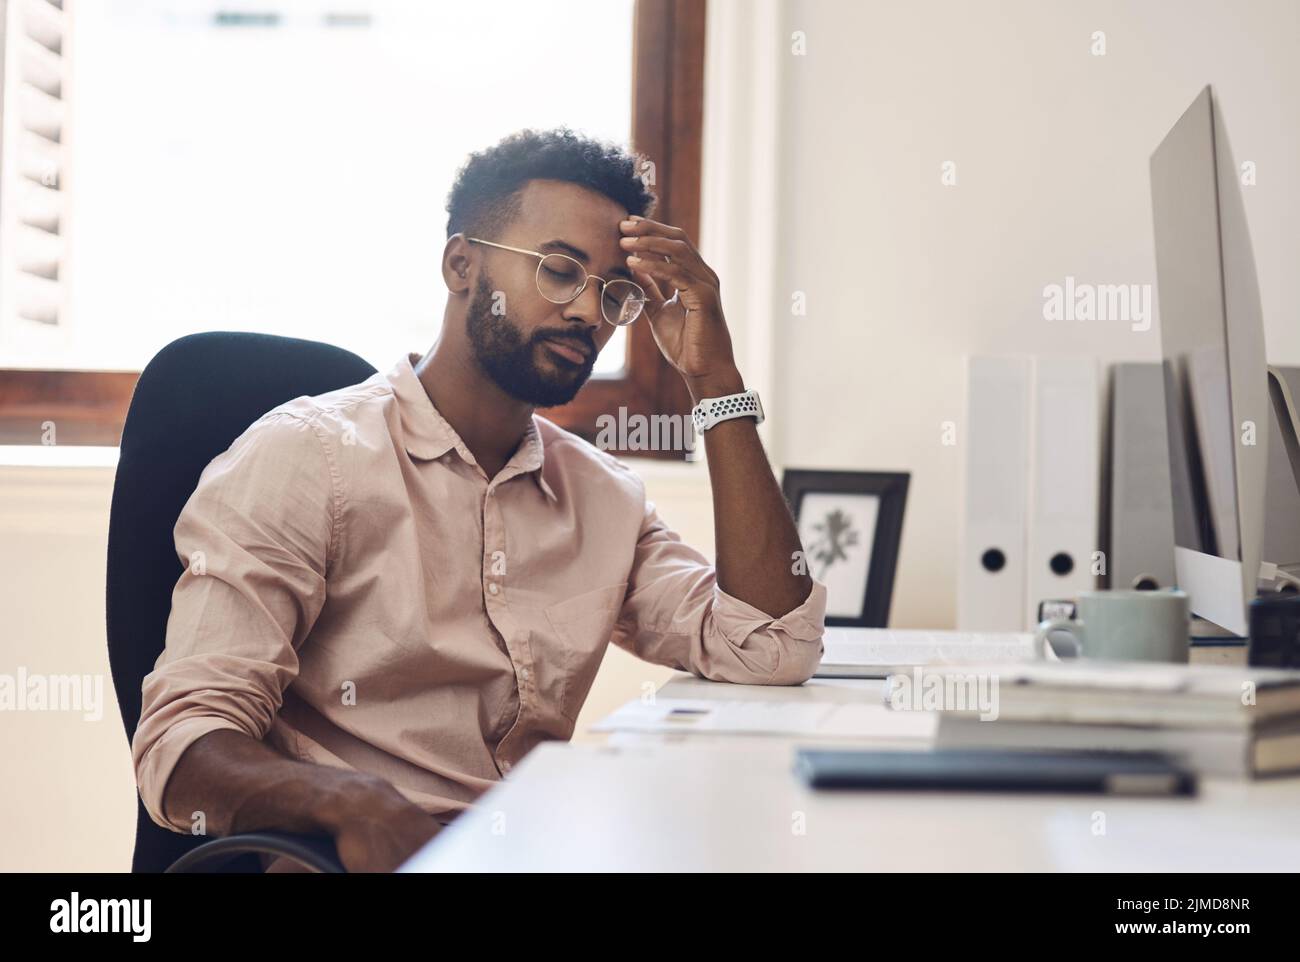 Every business has obstacles to overcome. a young businessman looking tired while working in an office. Stock Photo